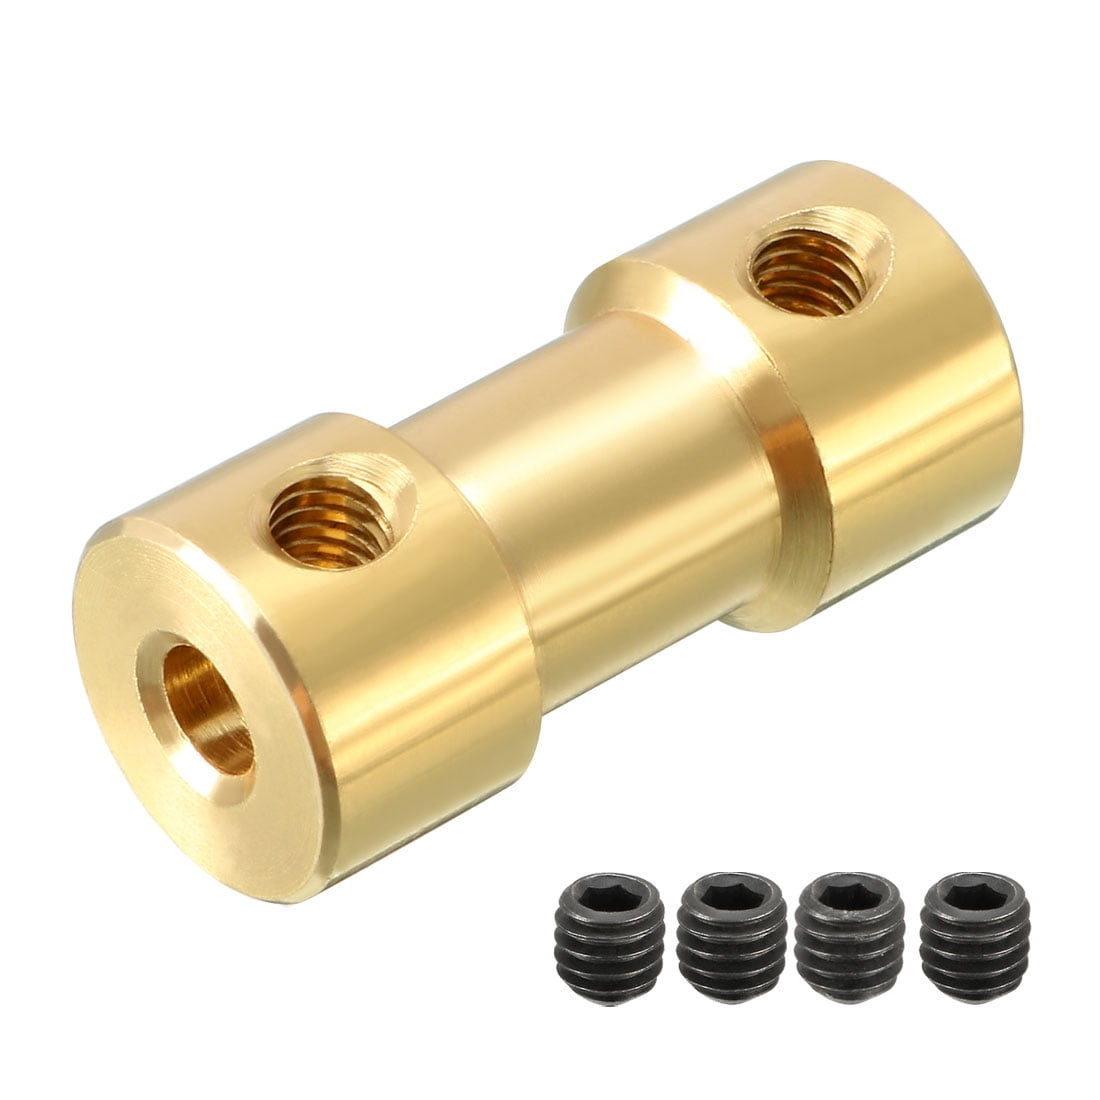 Brass Universal Joint Shaft Coupling Connector RC Model Boat Car 3 x 3mm  3-3mm